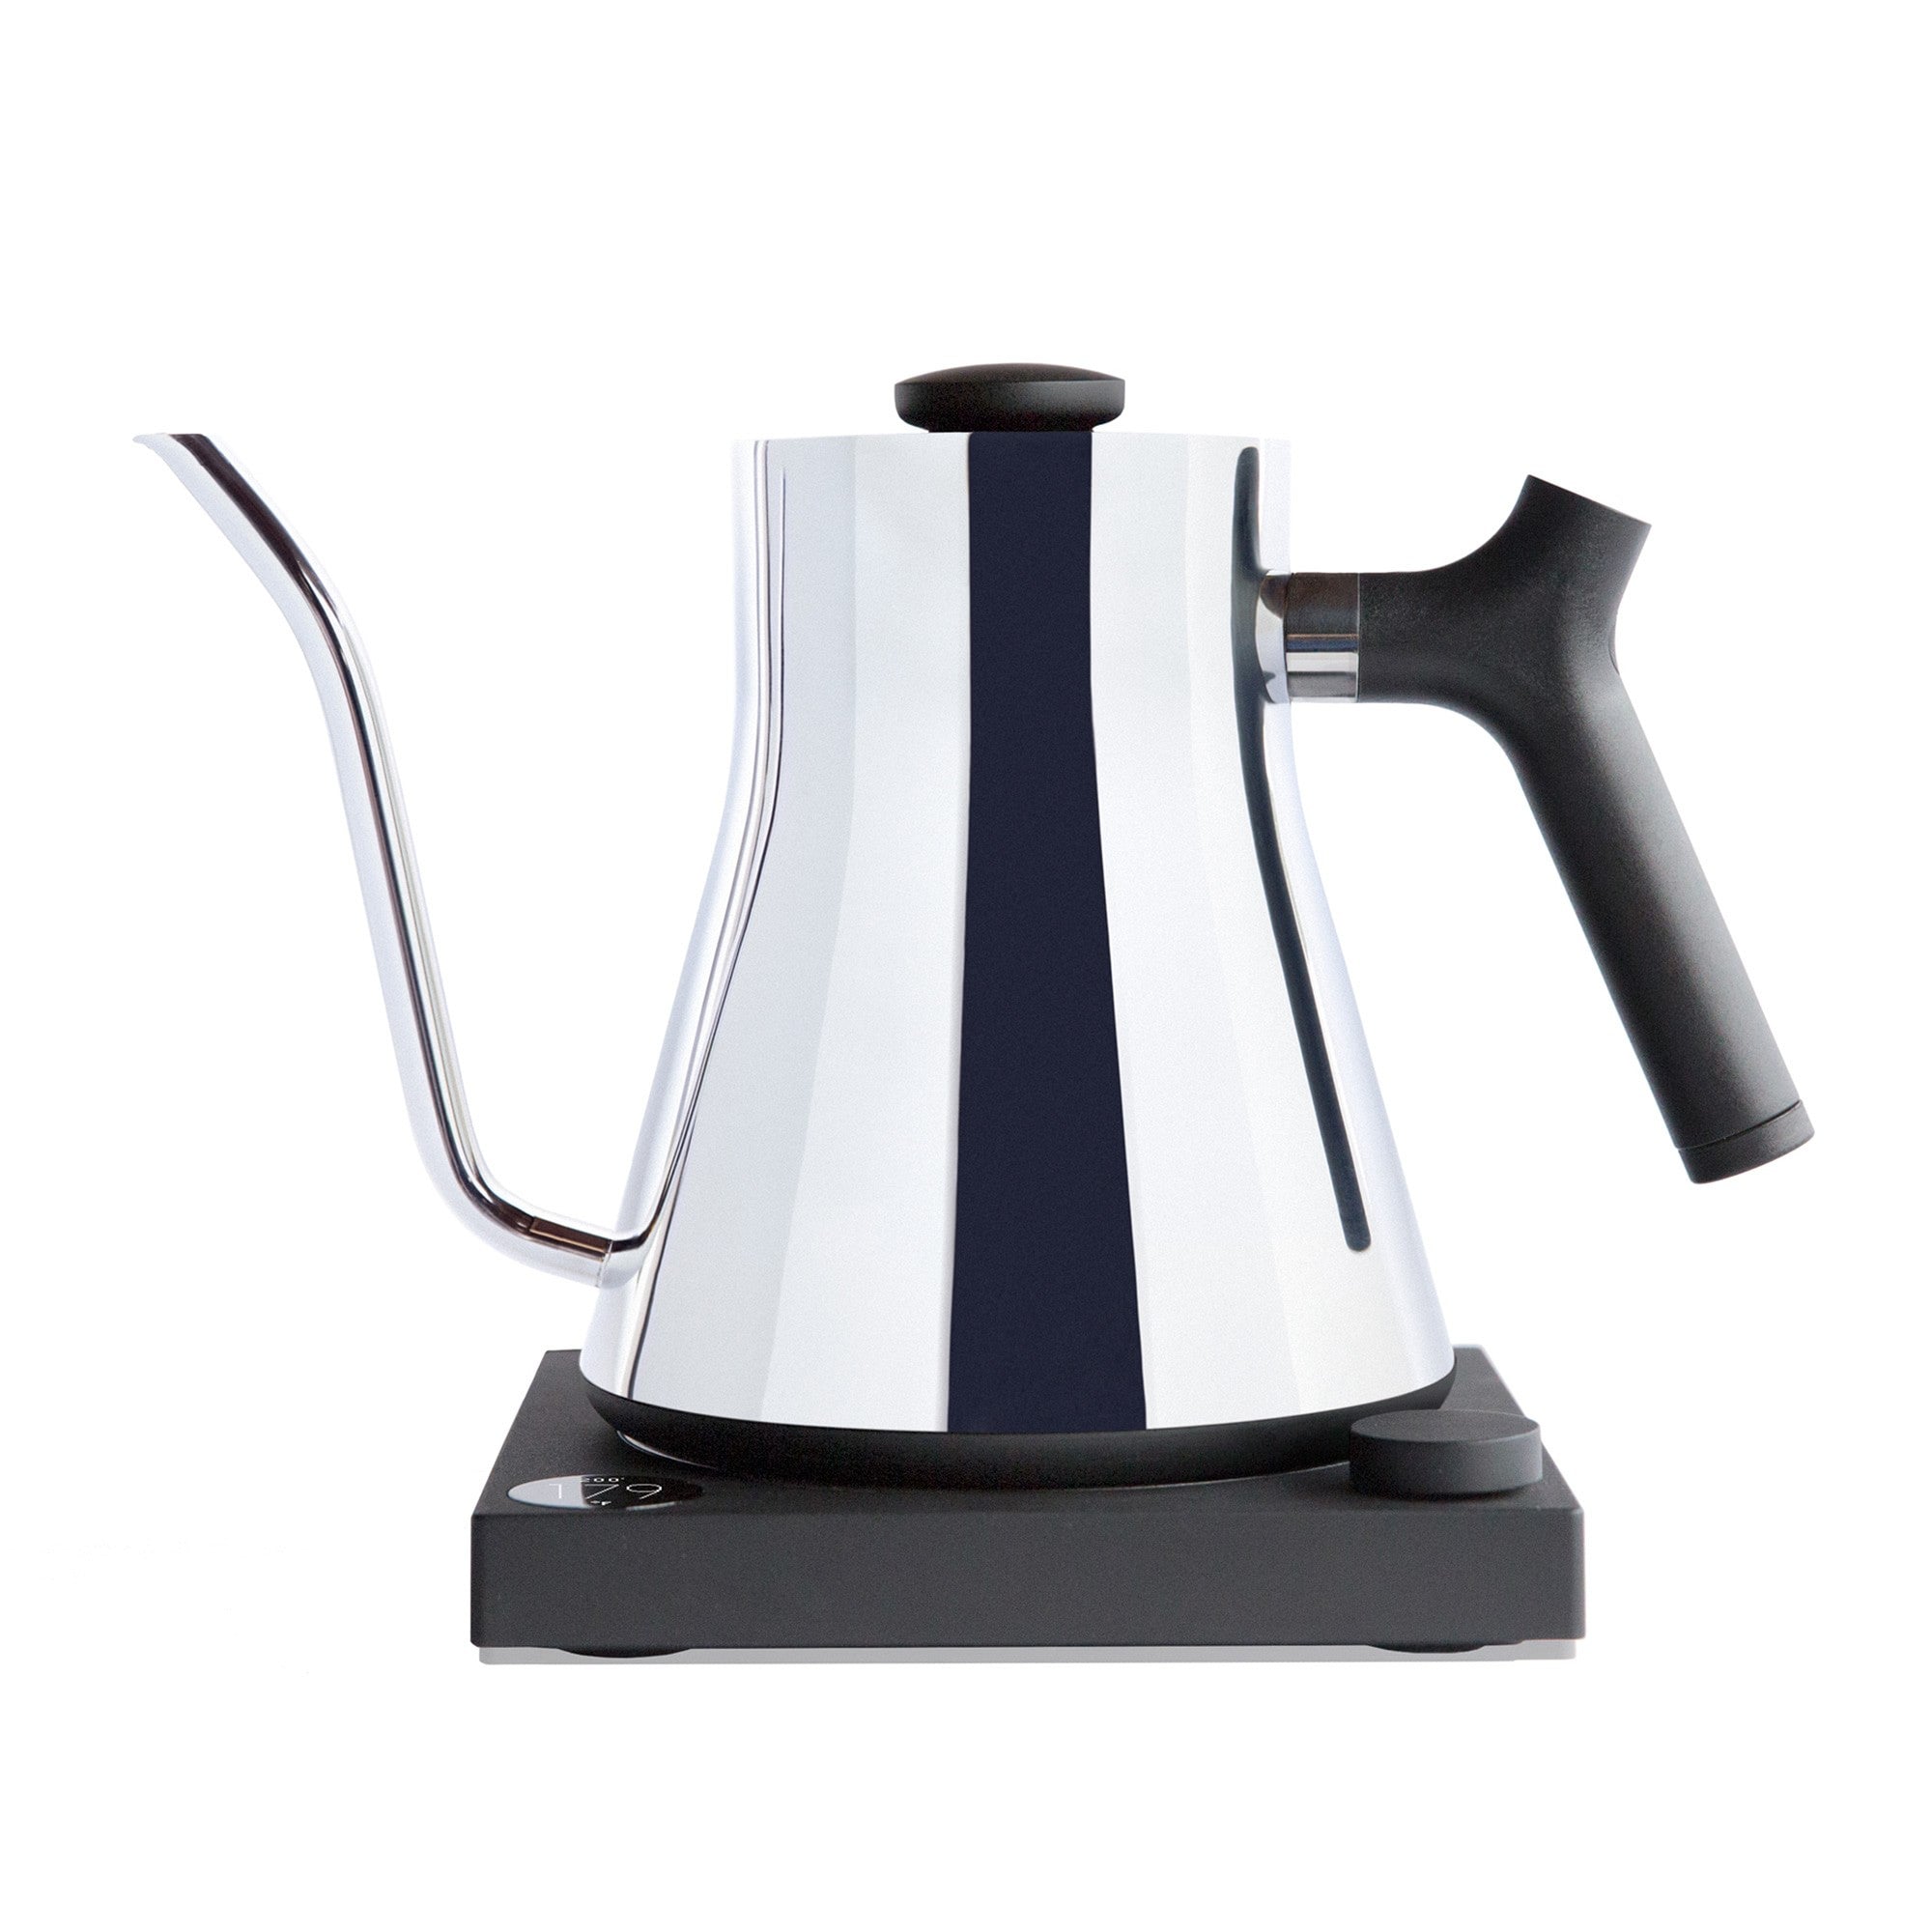 Stagg: The Electric Pour-Over Kettle for Coffee Lovers